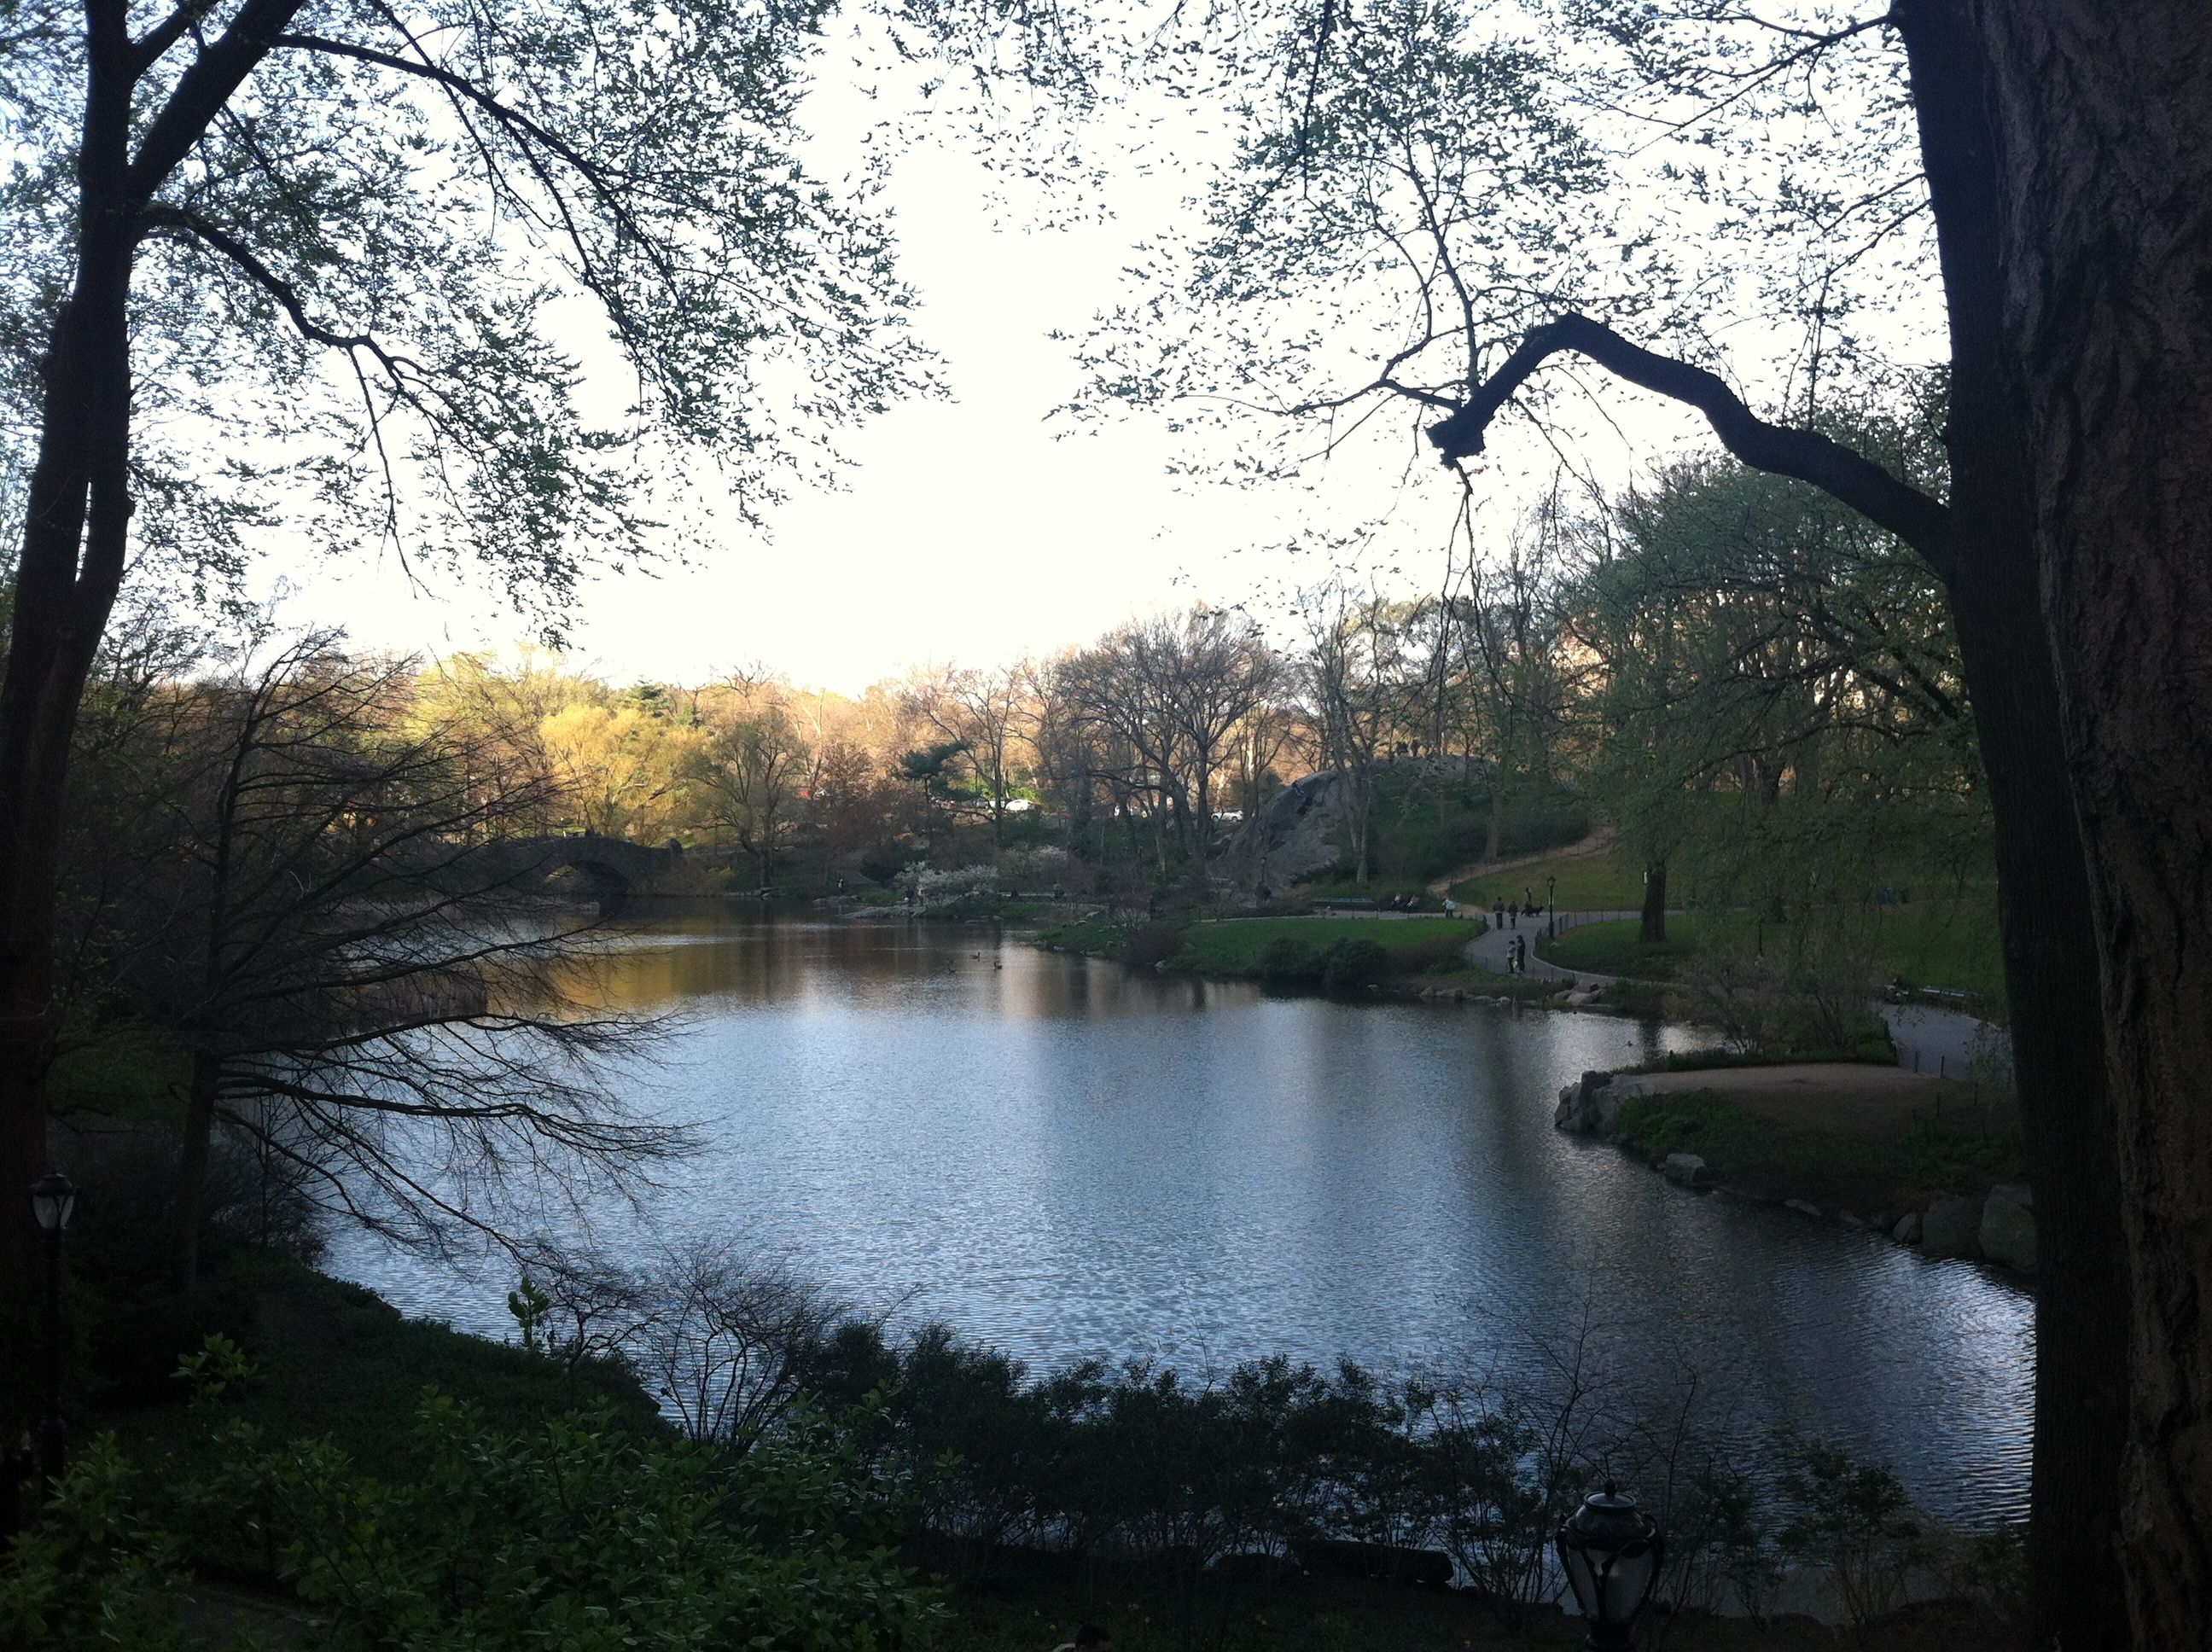 a view of the pond at the bottom of Central Park by Columbus Circle